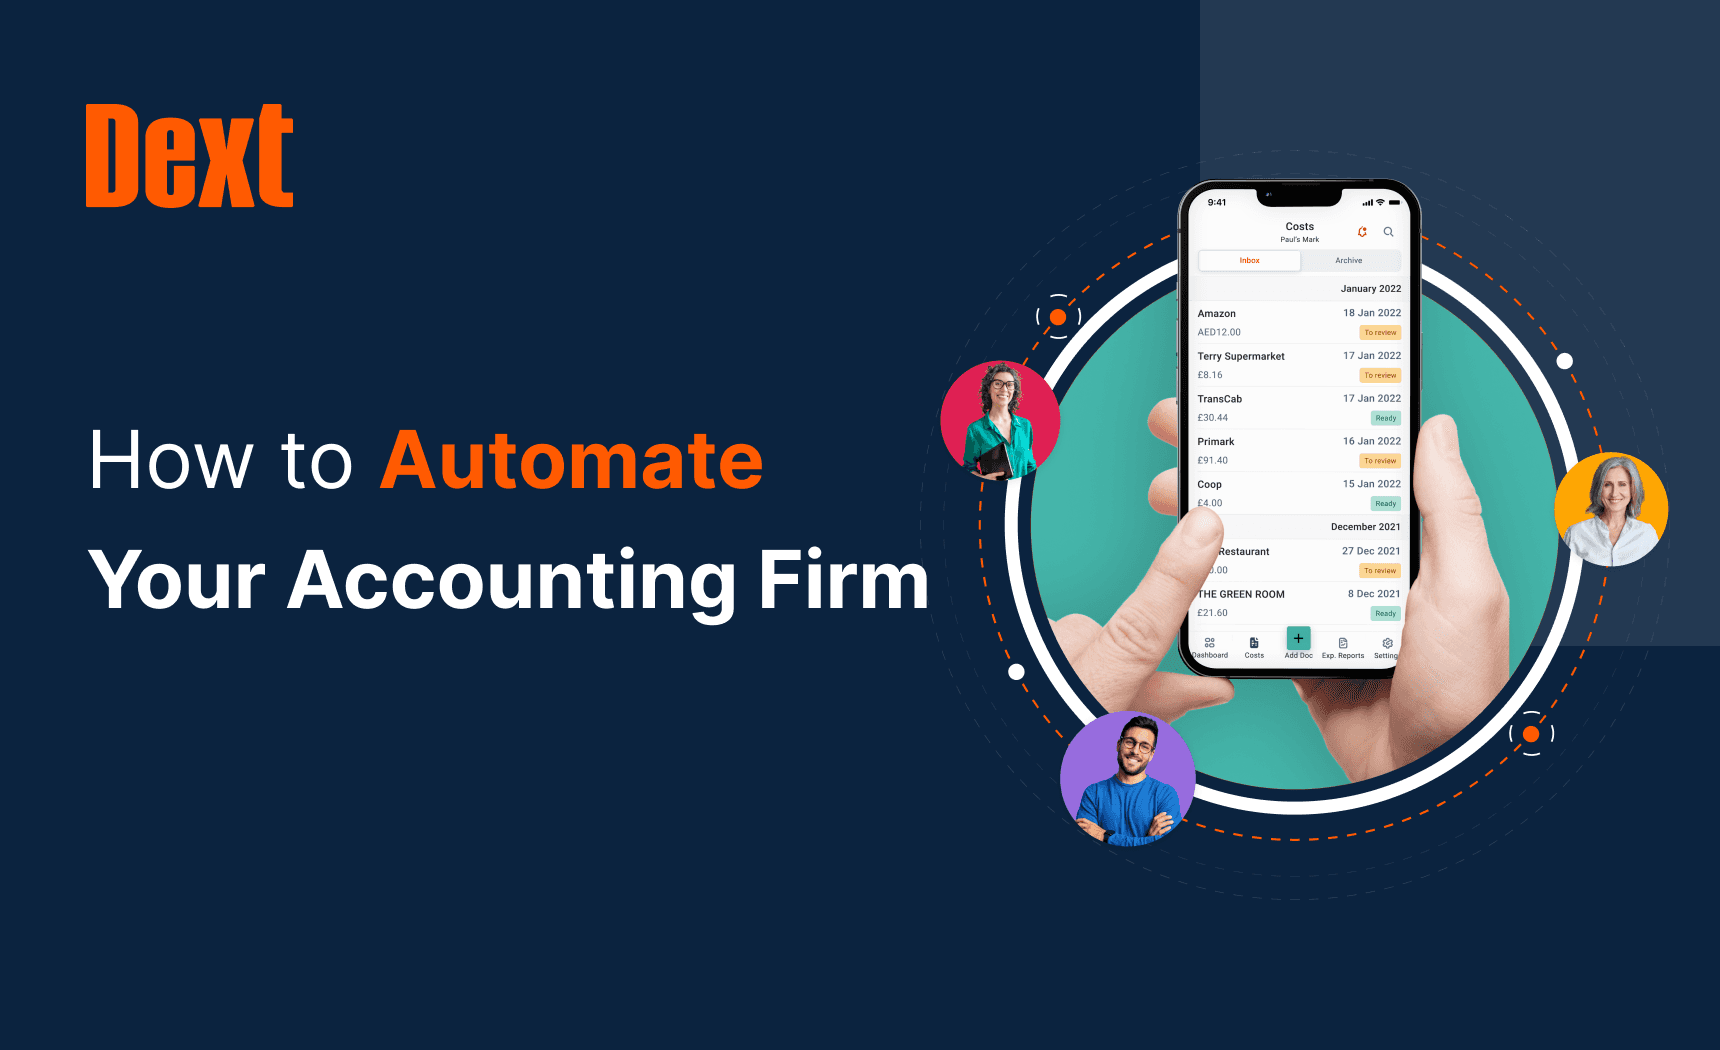 How to Automate Your Accounting Firm